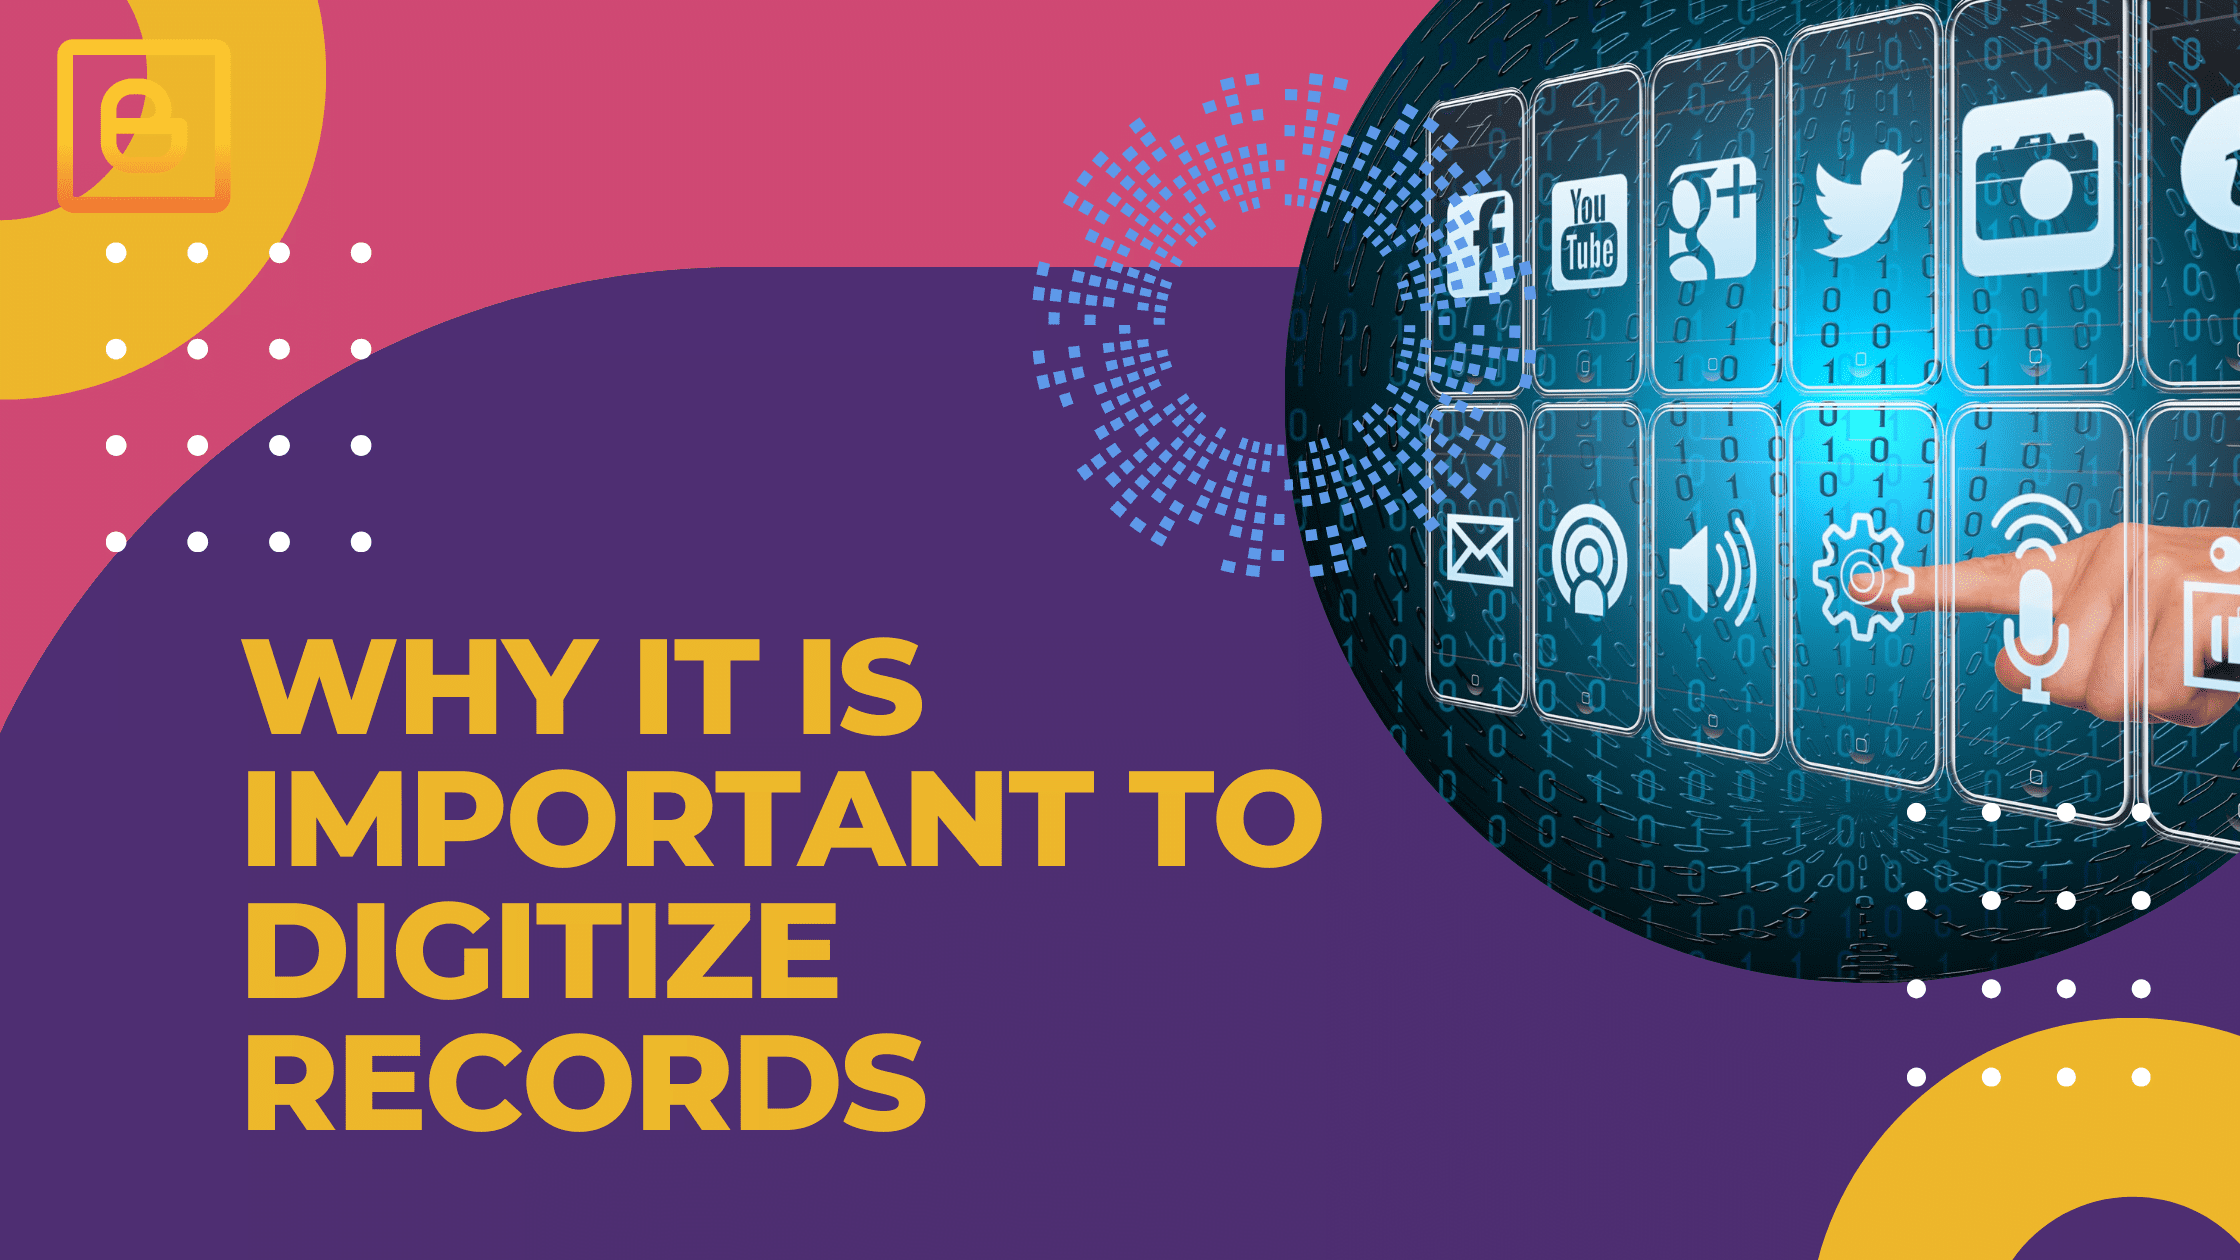 Why It Is Important to Digitize Records